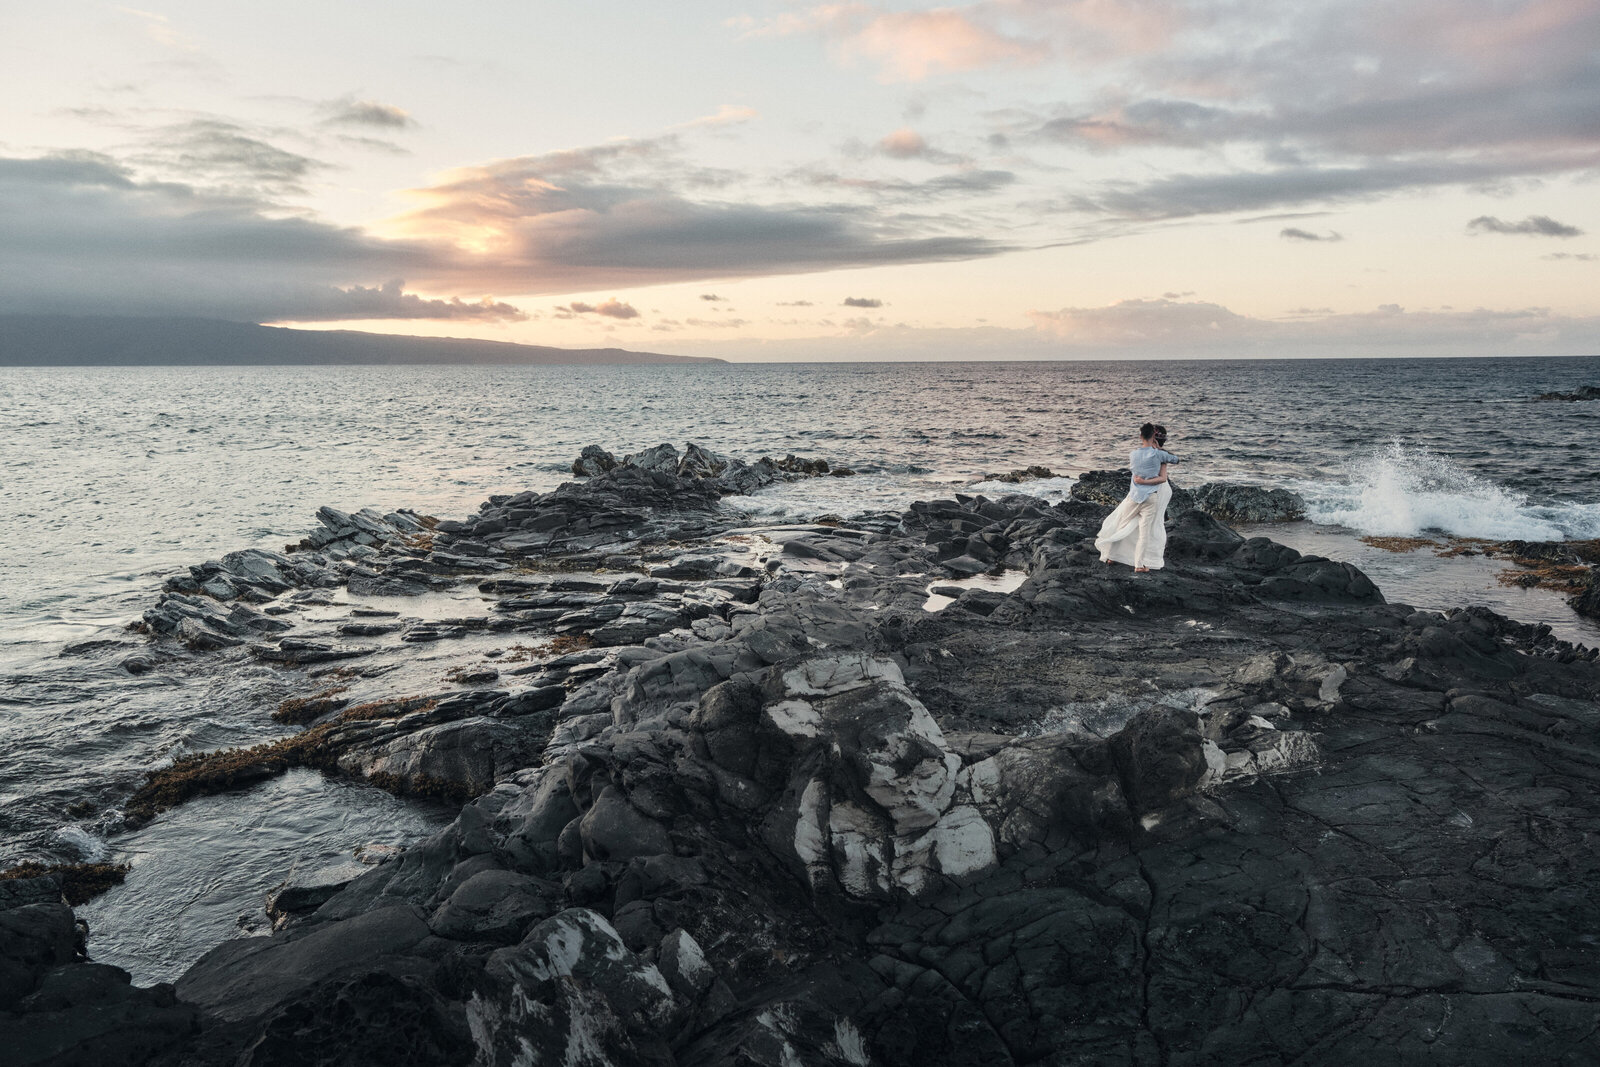 Water splashes upon rocky coastline as eloping couple looks on